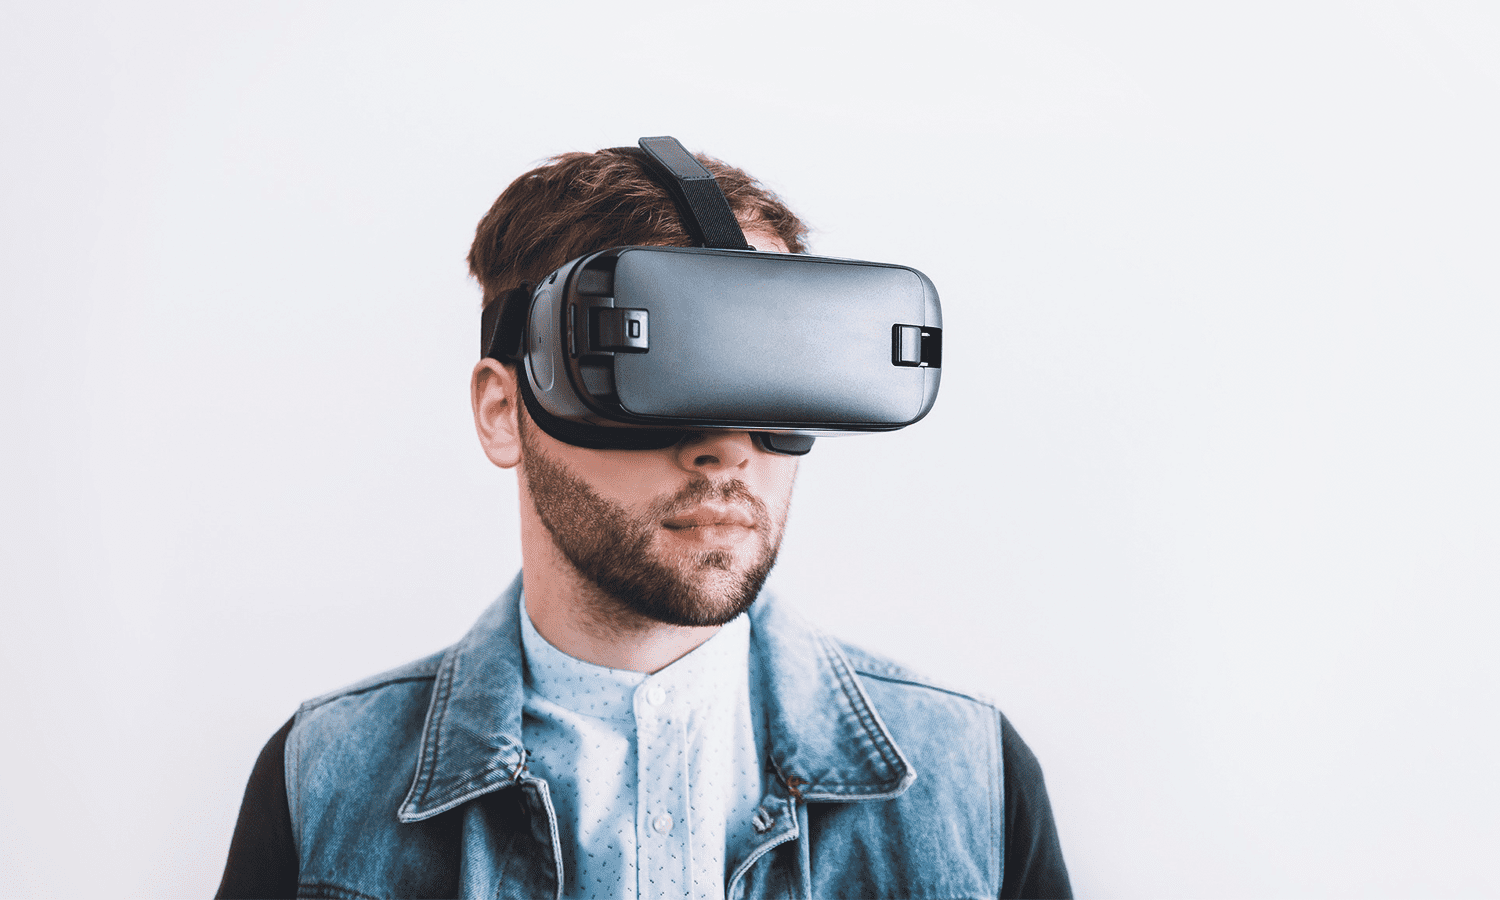 AR/VR and 360º video. B2B tools with an potential